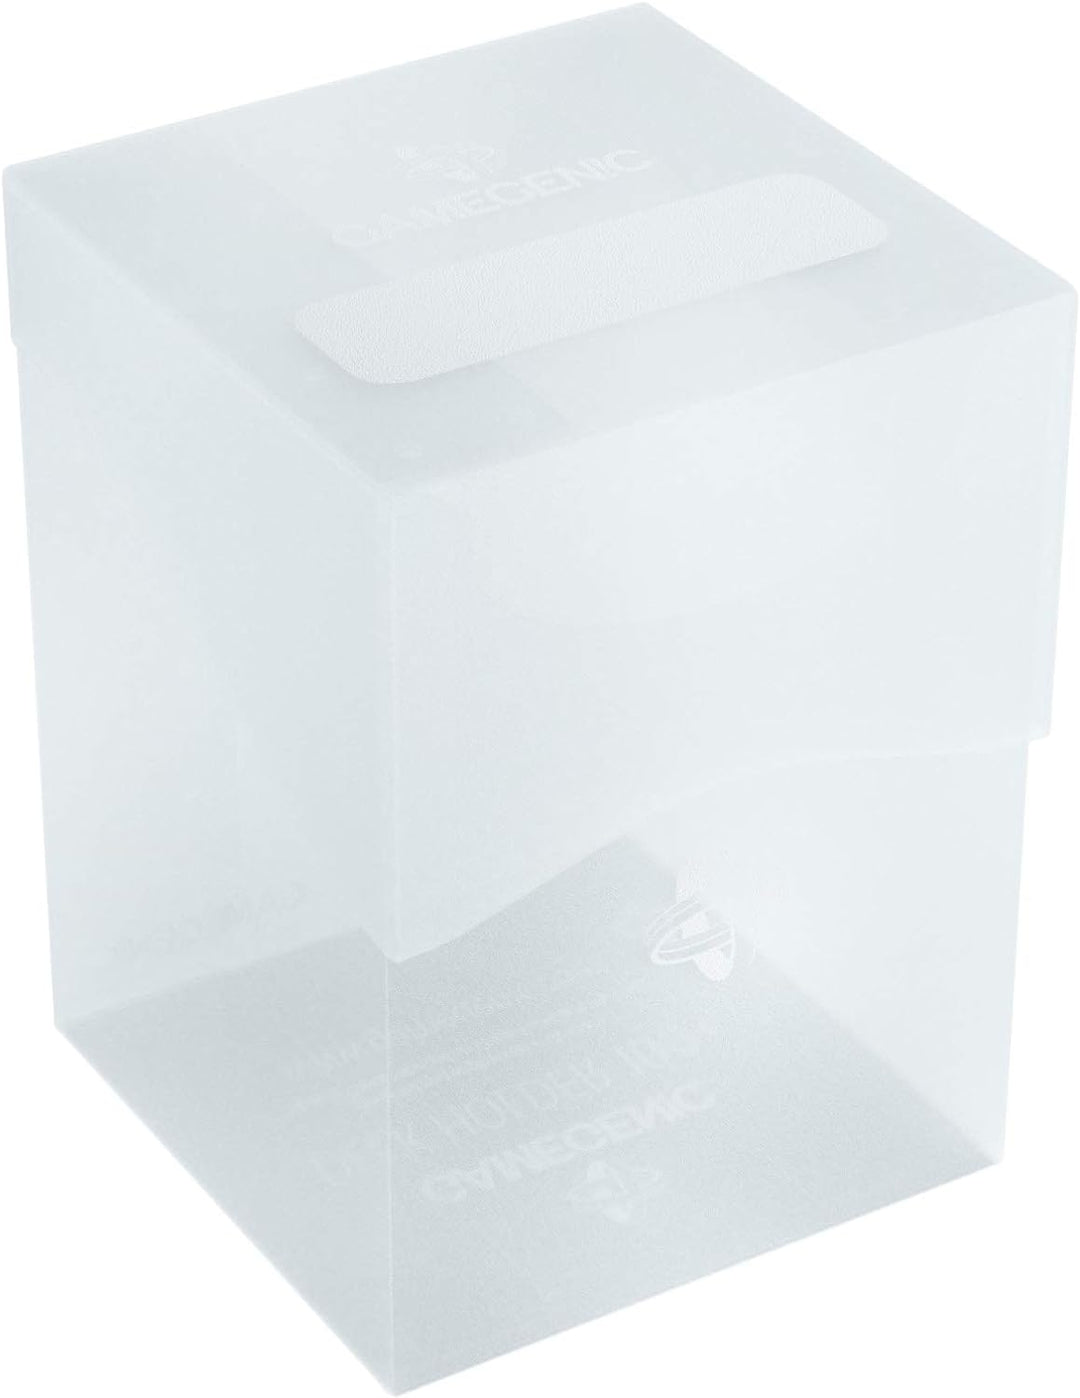 Gamegenic 100-Card Deck Holder, Clear